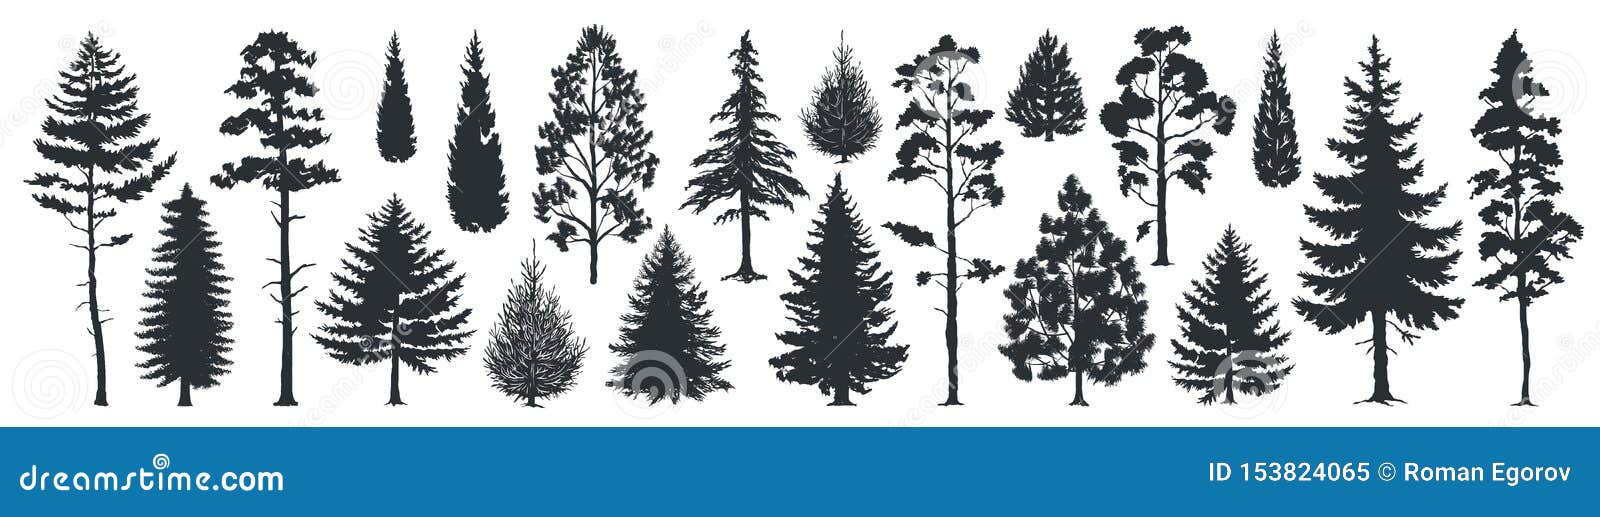 pine tree silhouettes. evergreen forest firs and spruces black s, wild nature trees templates.  woodland